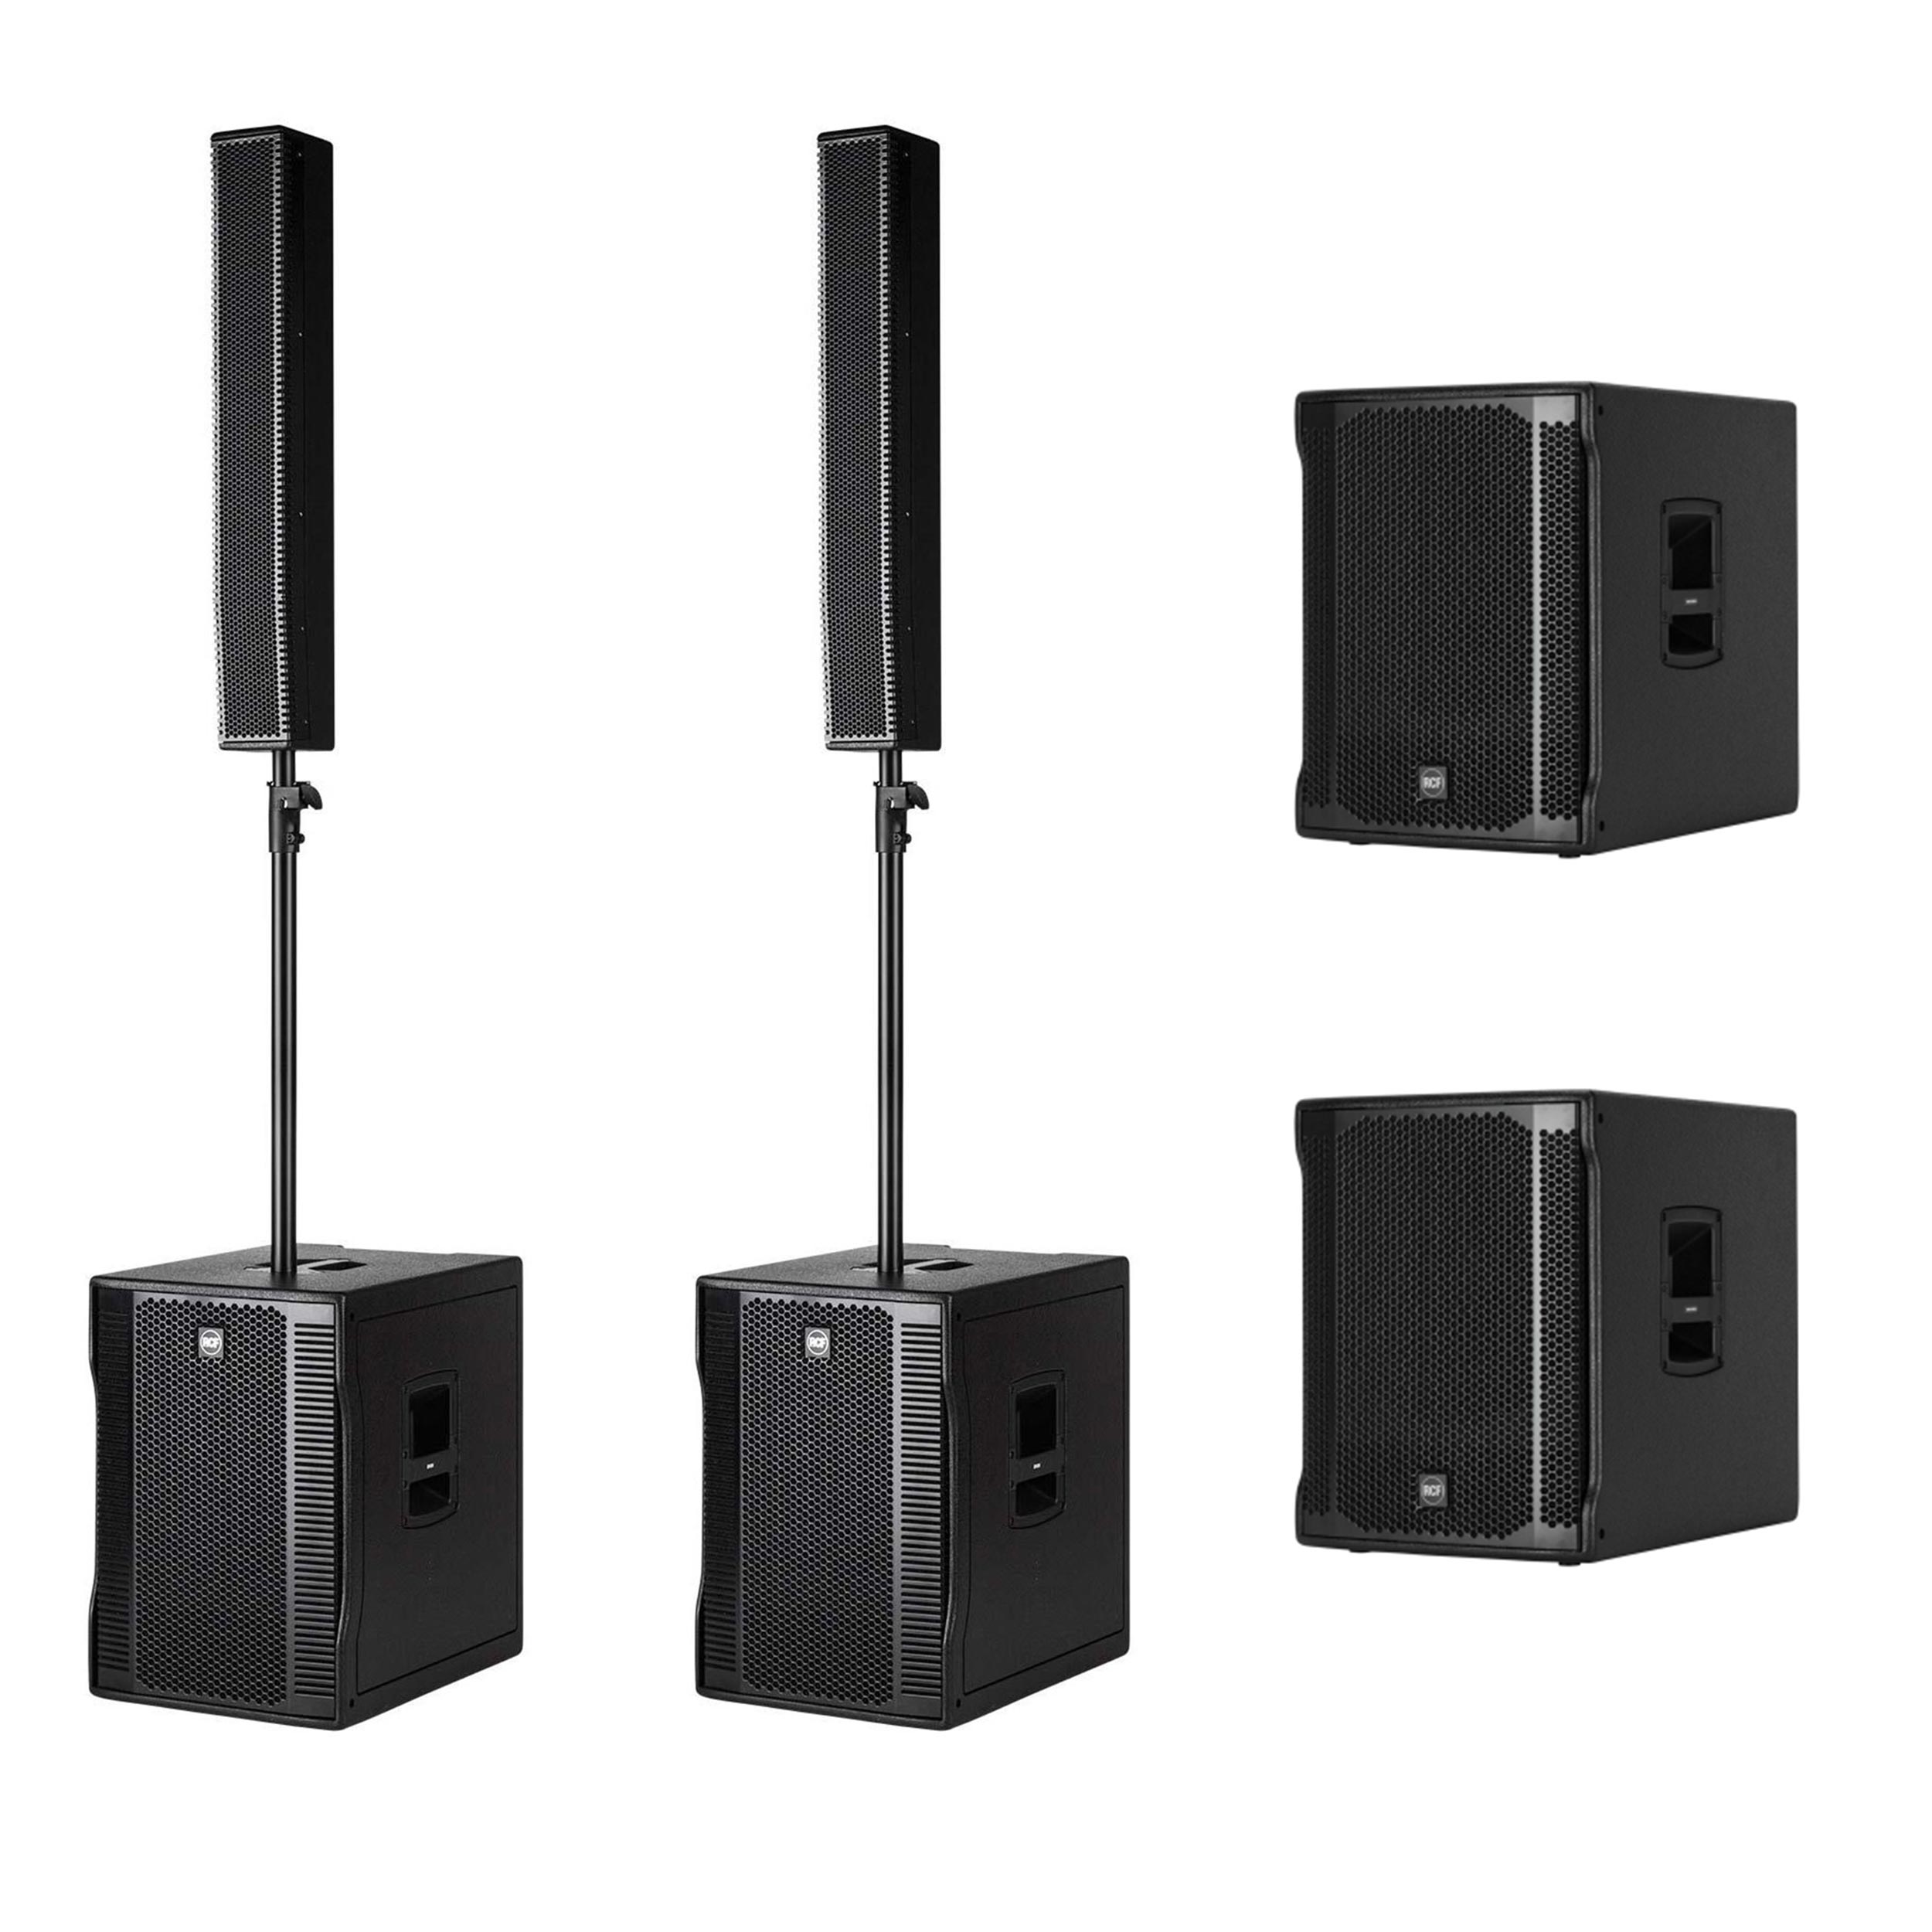 2 RCF EVOX 12 Compact Array System with 2 SUB 705-AS MKII 15